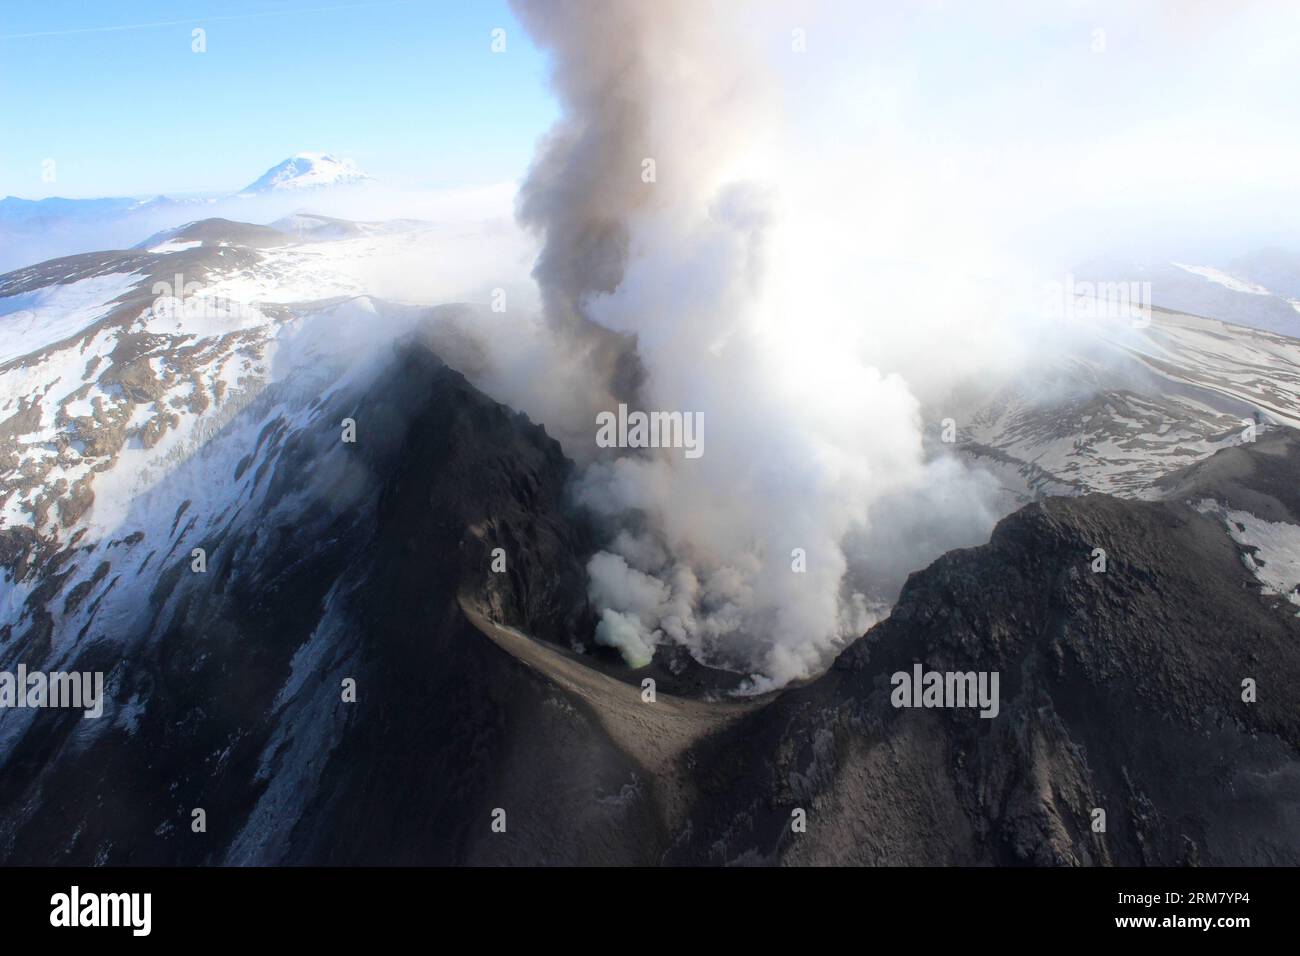 (140321) -- BIOBIO REGION, March 21, 2014 (Xinhua) -- Image taken on May 24, 2013, provided by Chile s National Service of Geology and Mining (SERNAGEOMIN) and Chile s National Emergency Office (ONEMI), shows Copahue volcano spewing ash in Biobio Region, Chile. The Copahue volcano with 3,000 meters high is located in the Andes mountain range. On Thursday the ONEMI decreed that the activity of the volcano is at Orange Level, which means that could erupt in a time not determined. Specifically the institution reported that the monitoring station installed in the area recorded an increase in volca Stock Photo